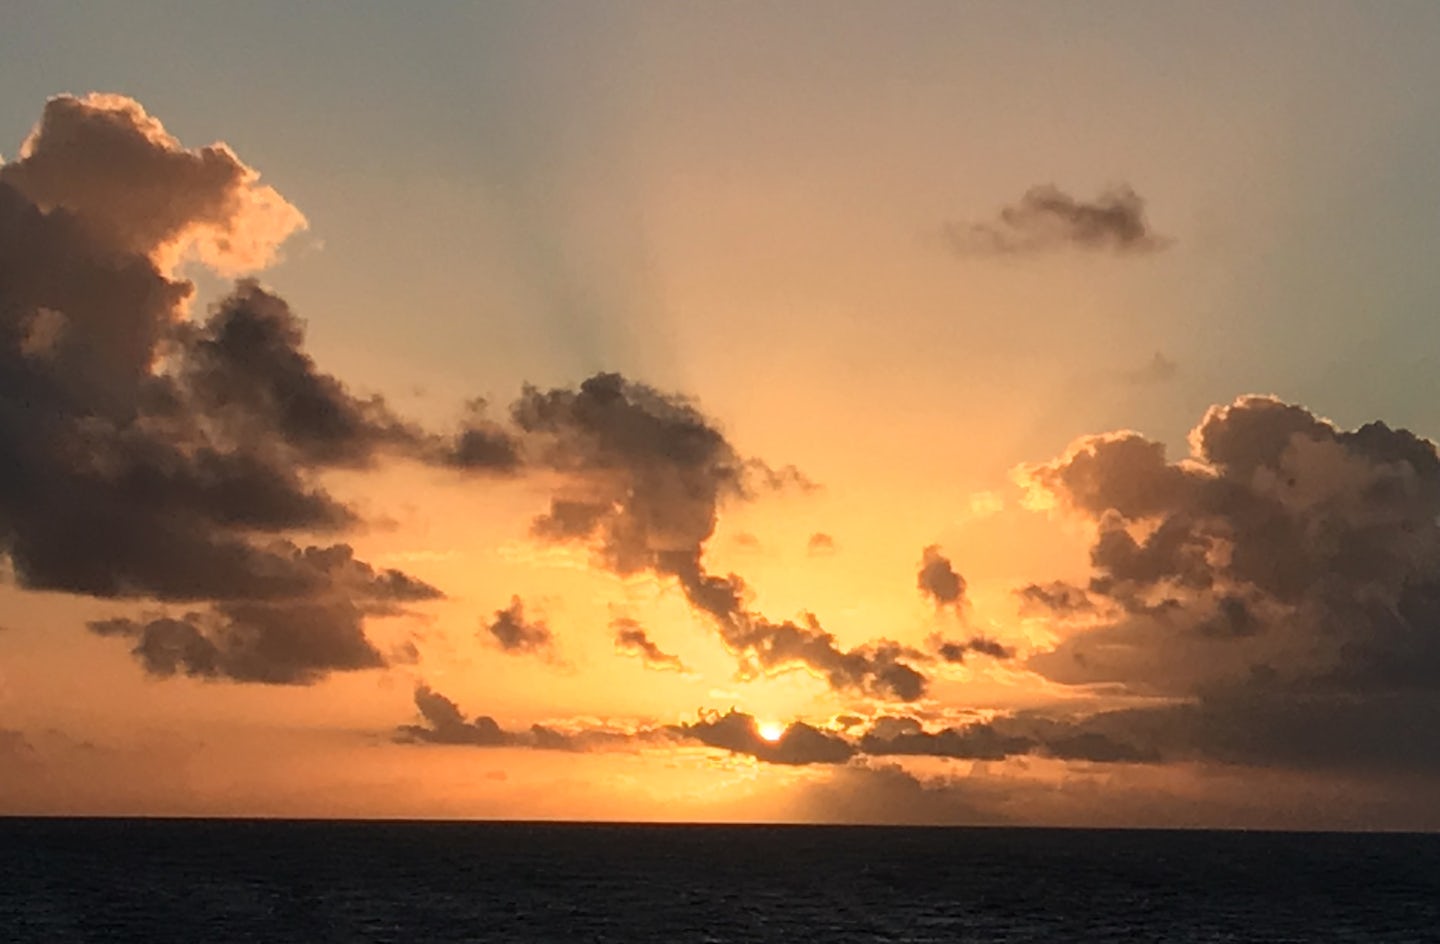 One of the best sunrises, near the end of our cruise.